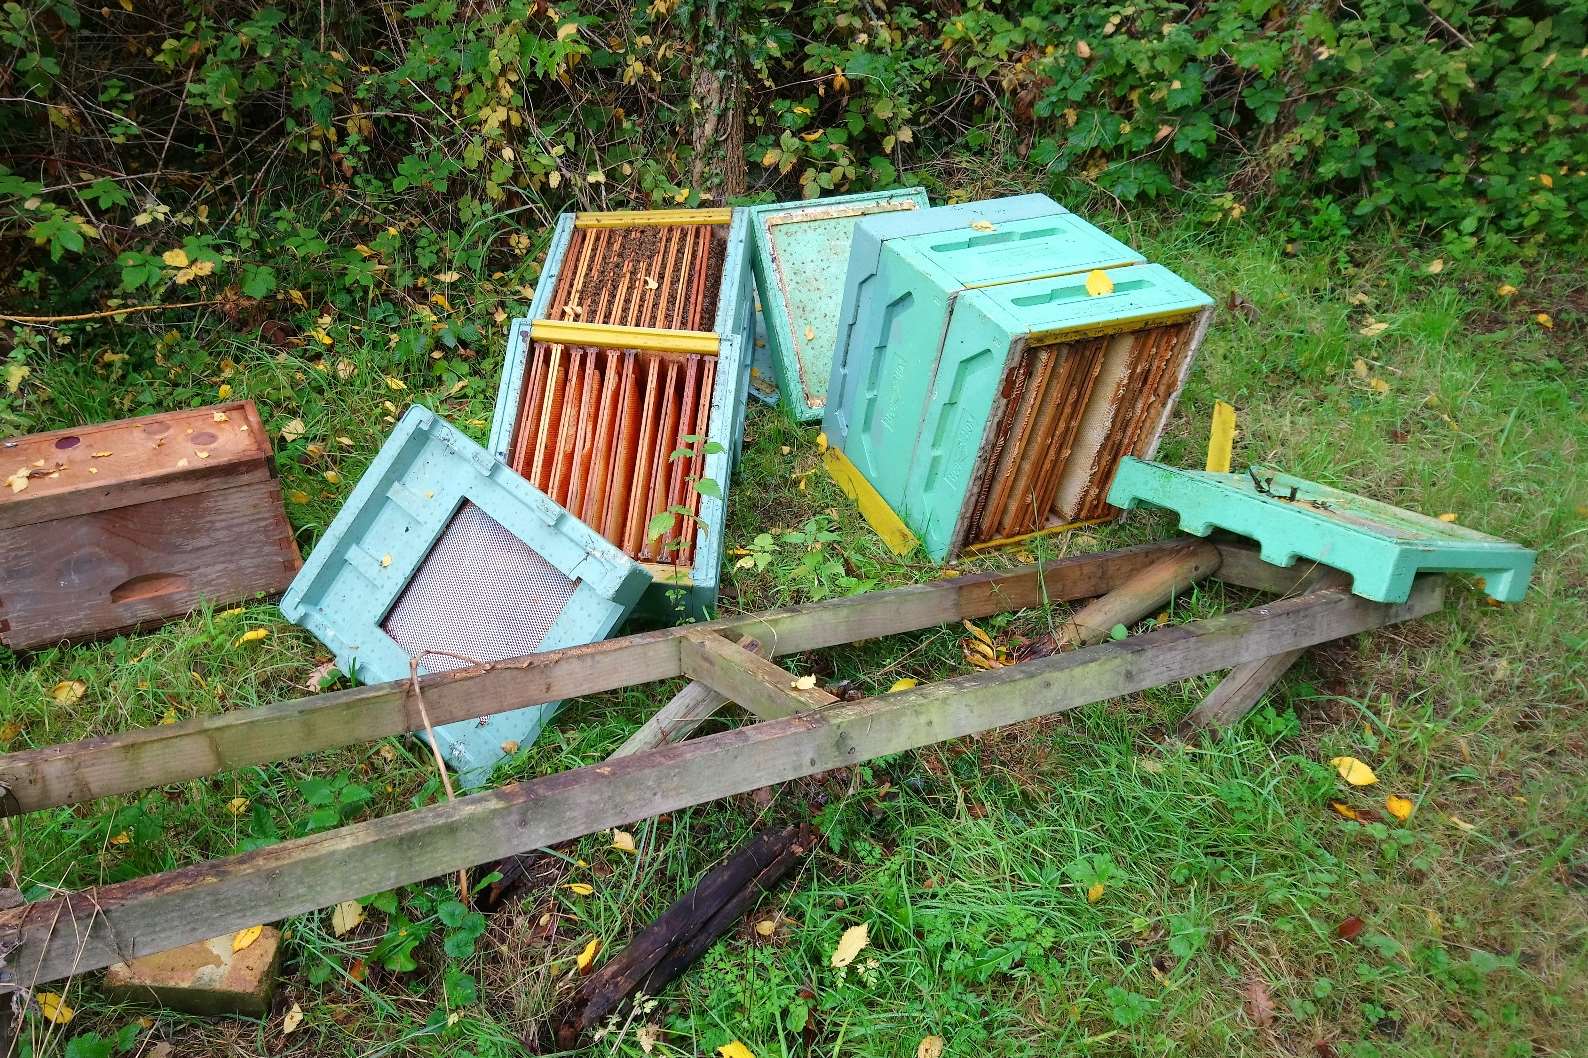 The beehives were damaged.